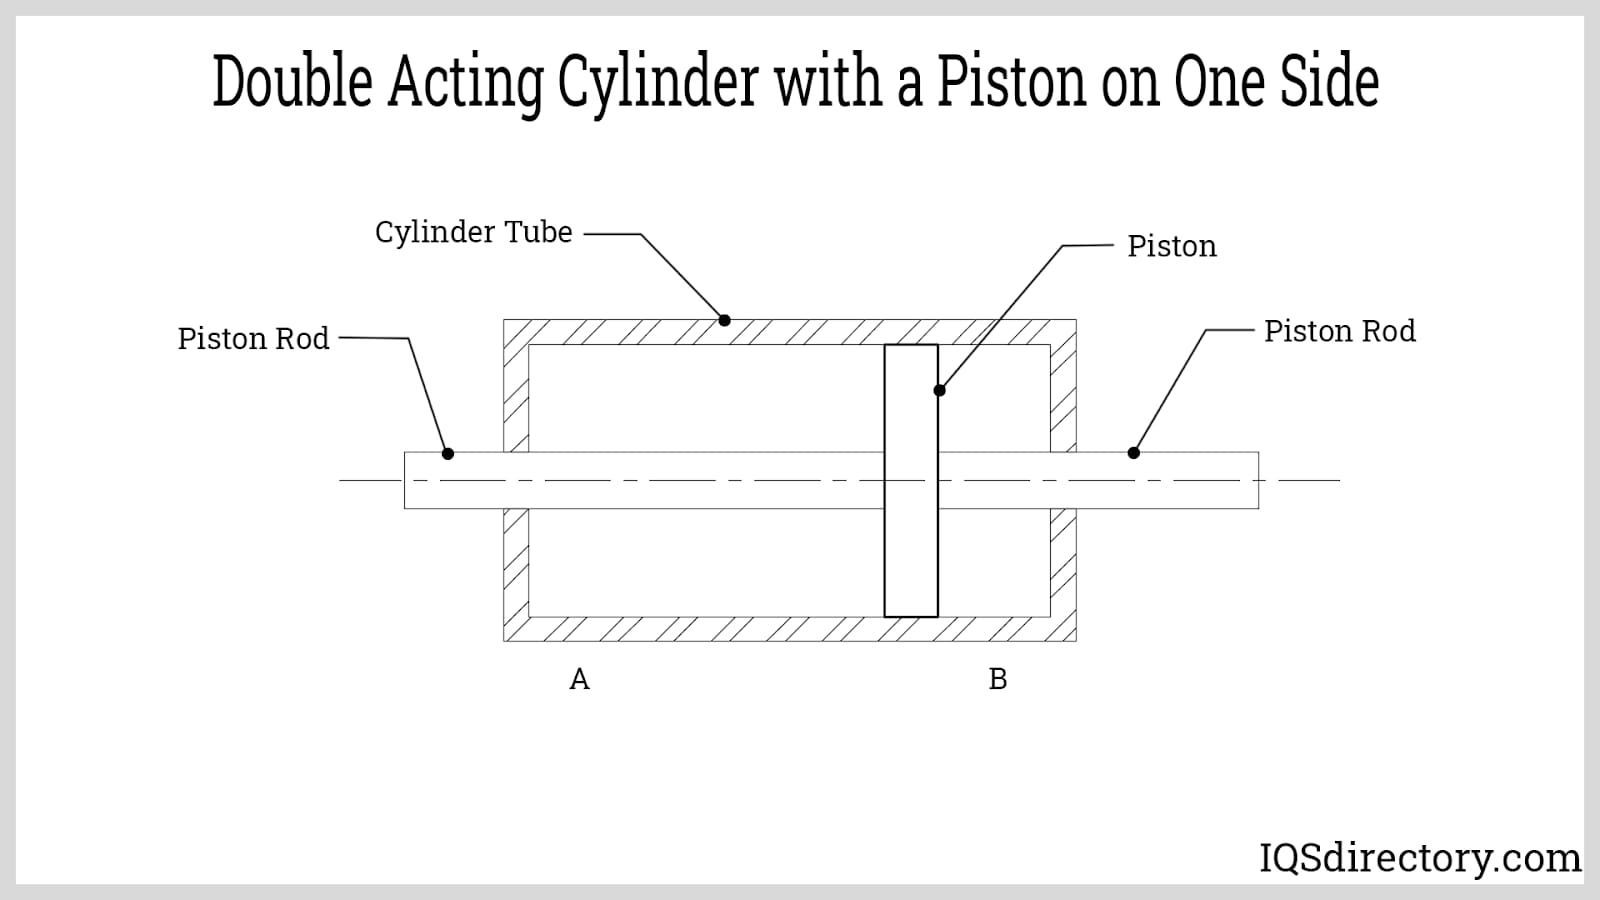 Double-Acting Cylinder with a Piston on Both Sides